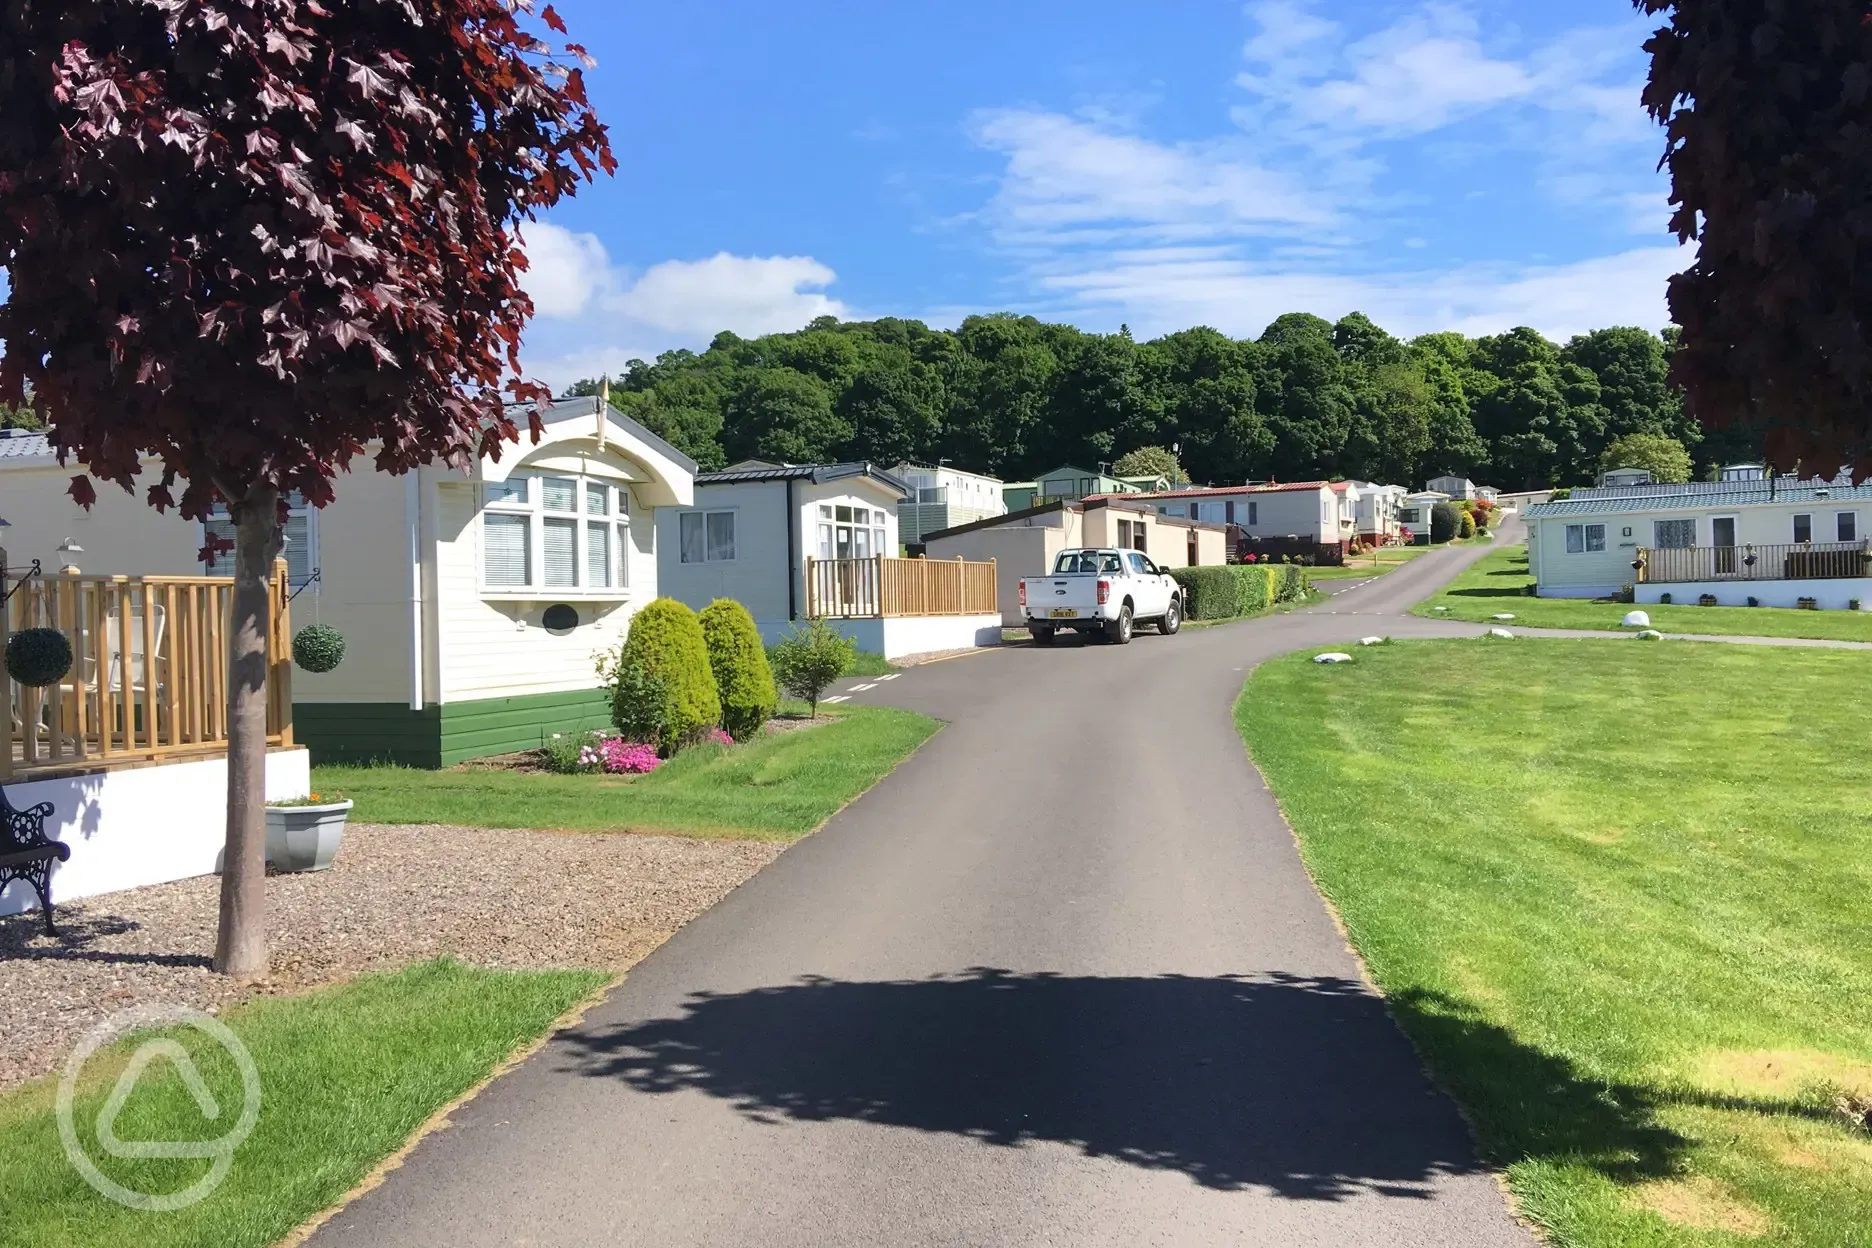 View of Blairgowire Holiday Park